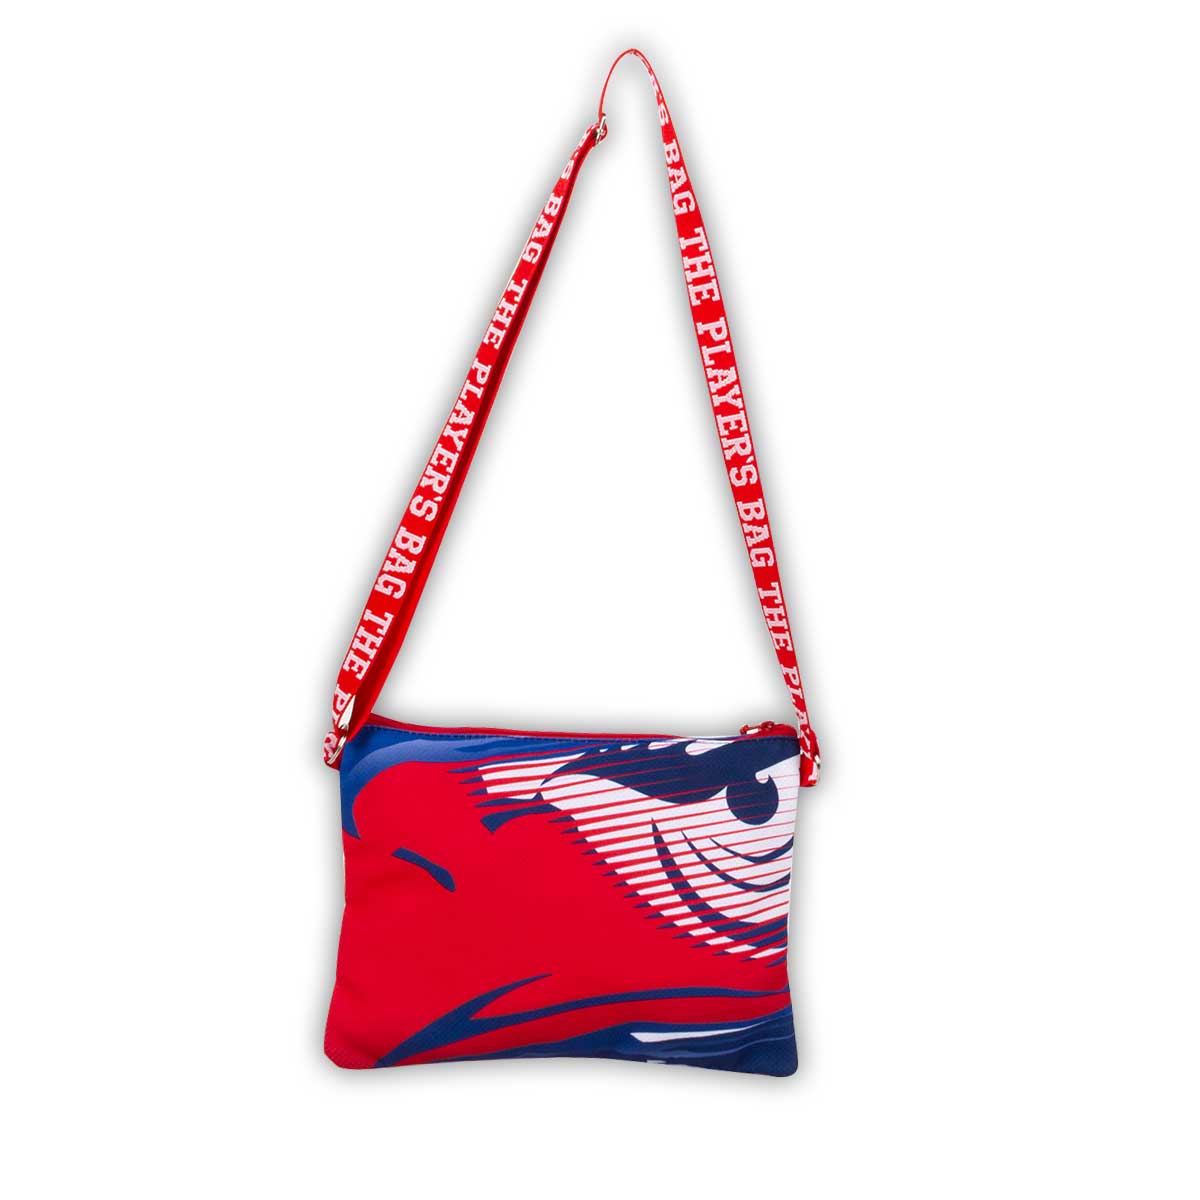 The Player's Style® Clutch Adler Mannheim